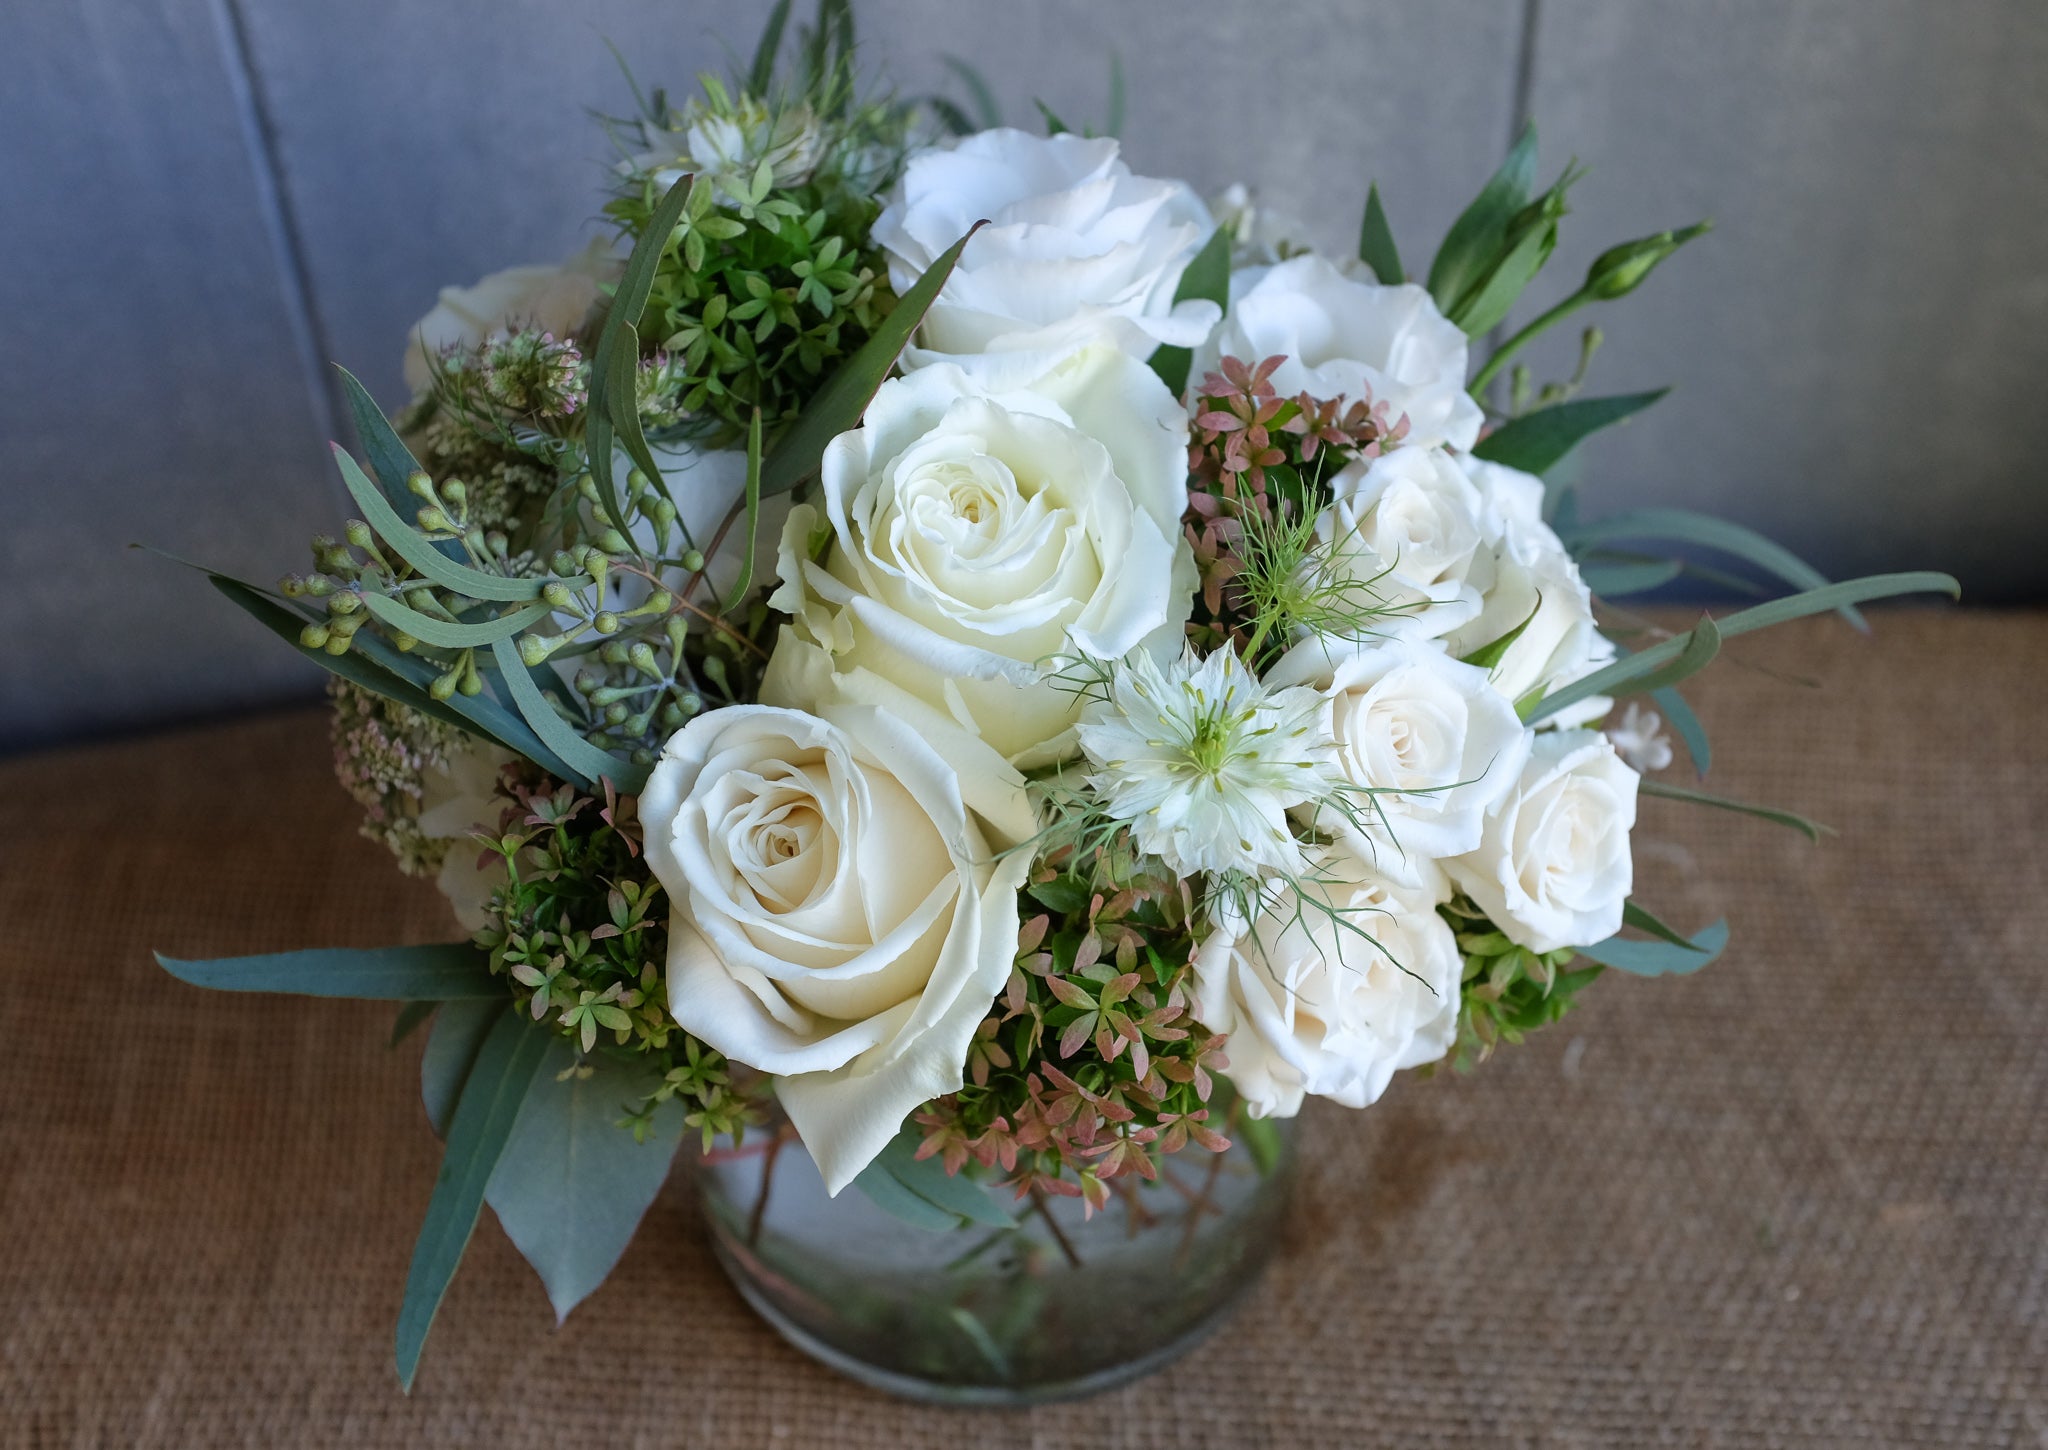 contemporary floral bouquet with white roses, hydrangea, lisianthus and autumnal seasonal accents